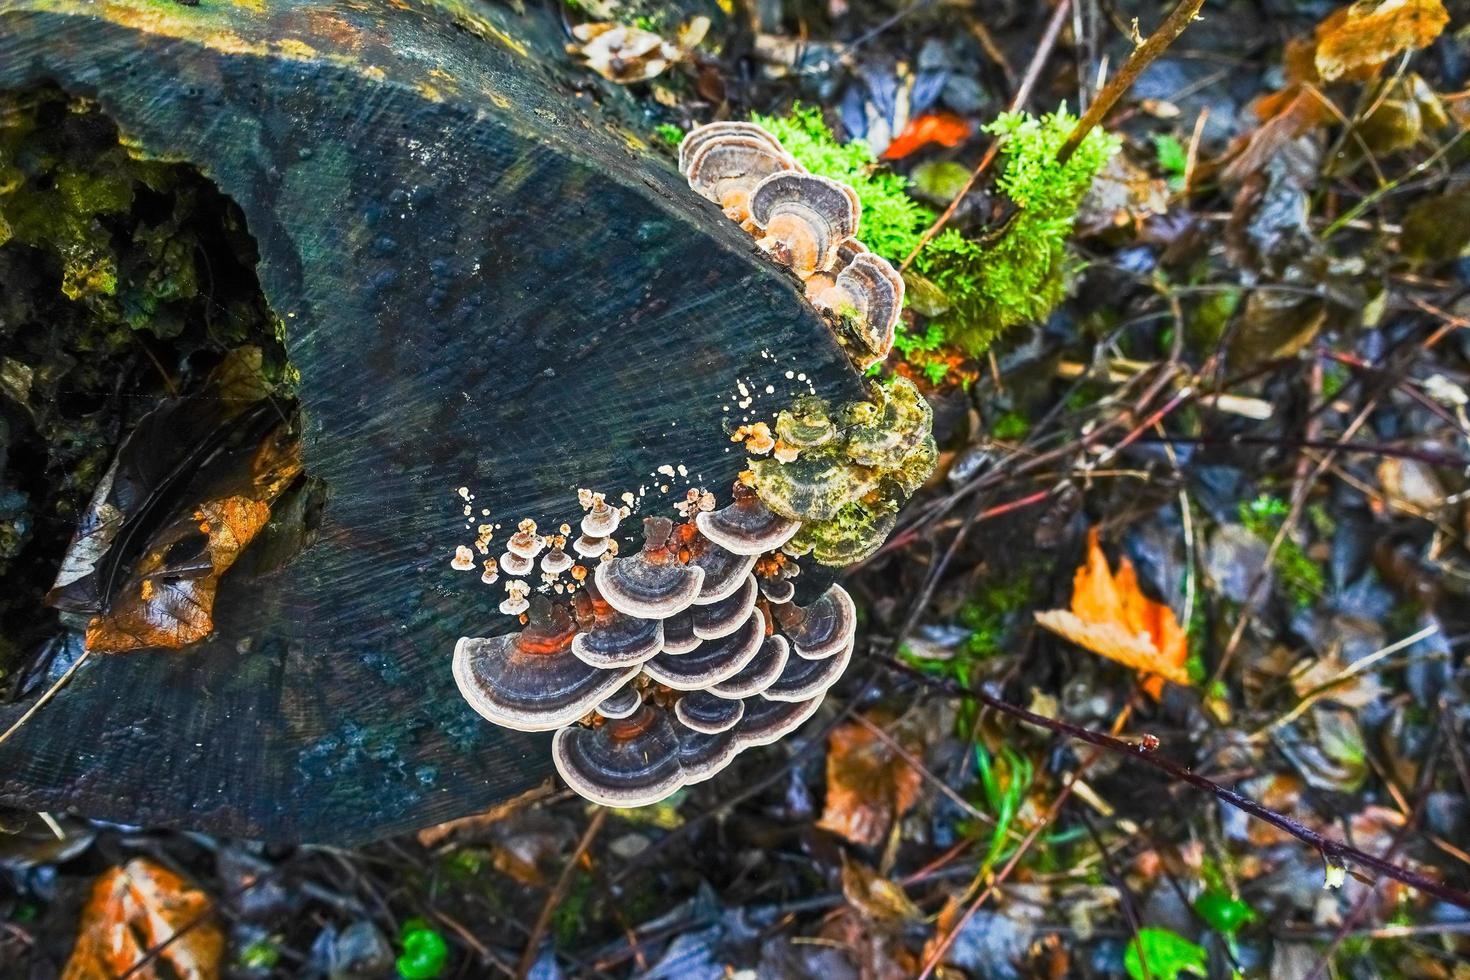 many colored polypore mushrooms on a tree trunk in a forest view from above photo